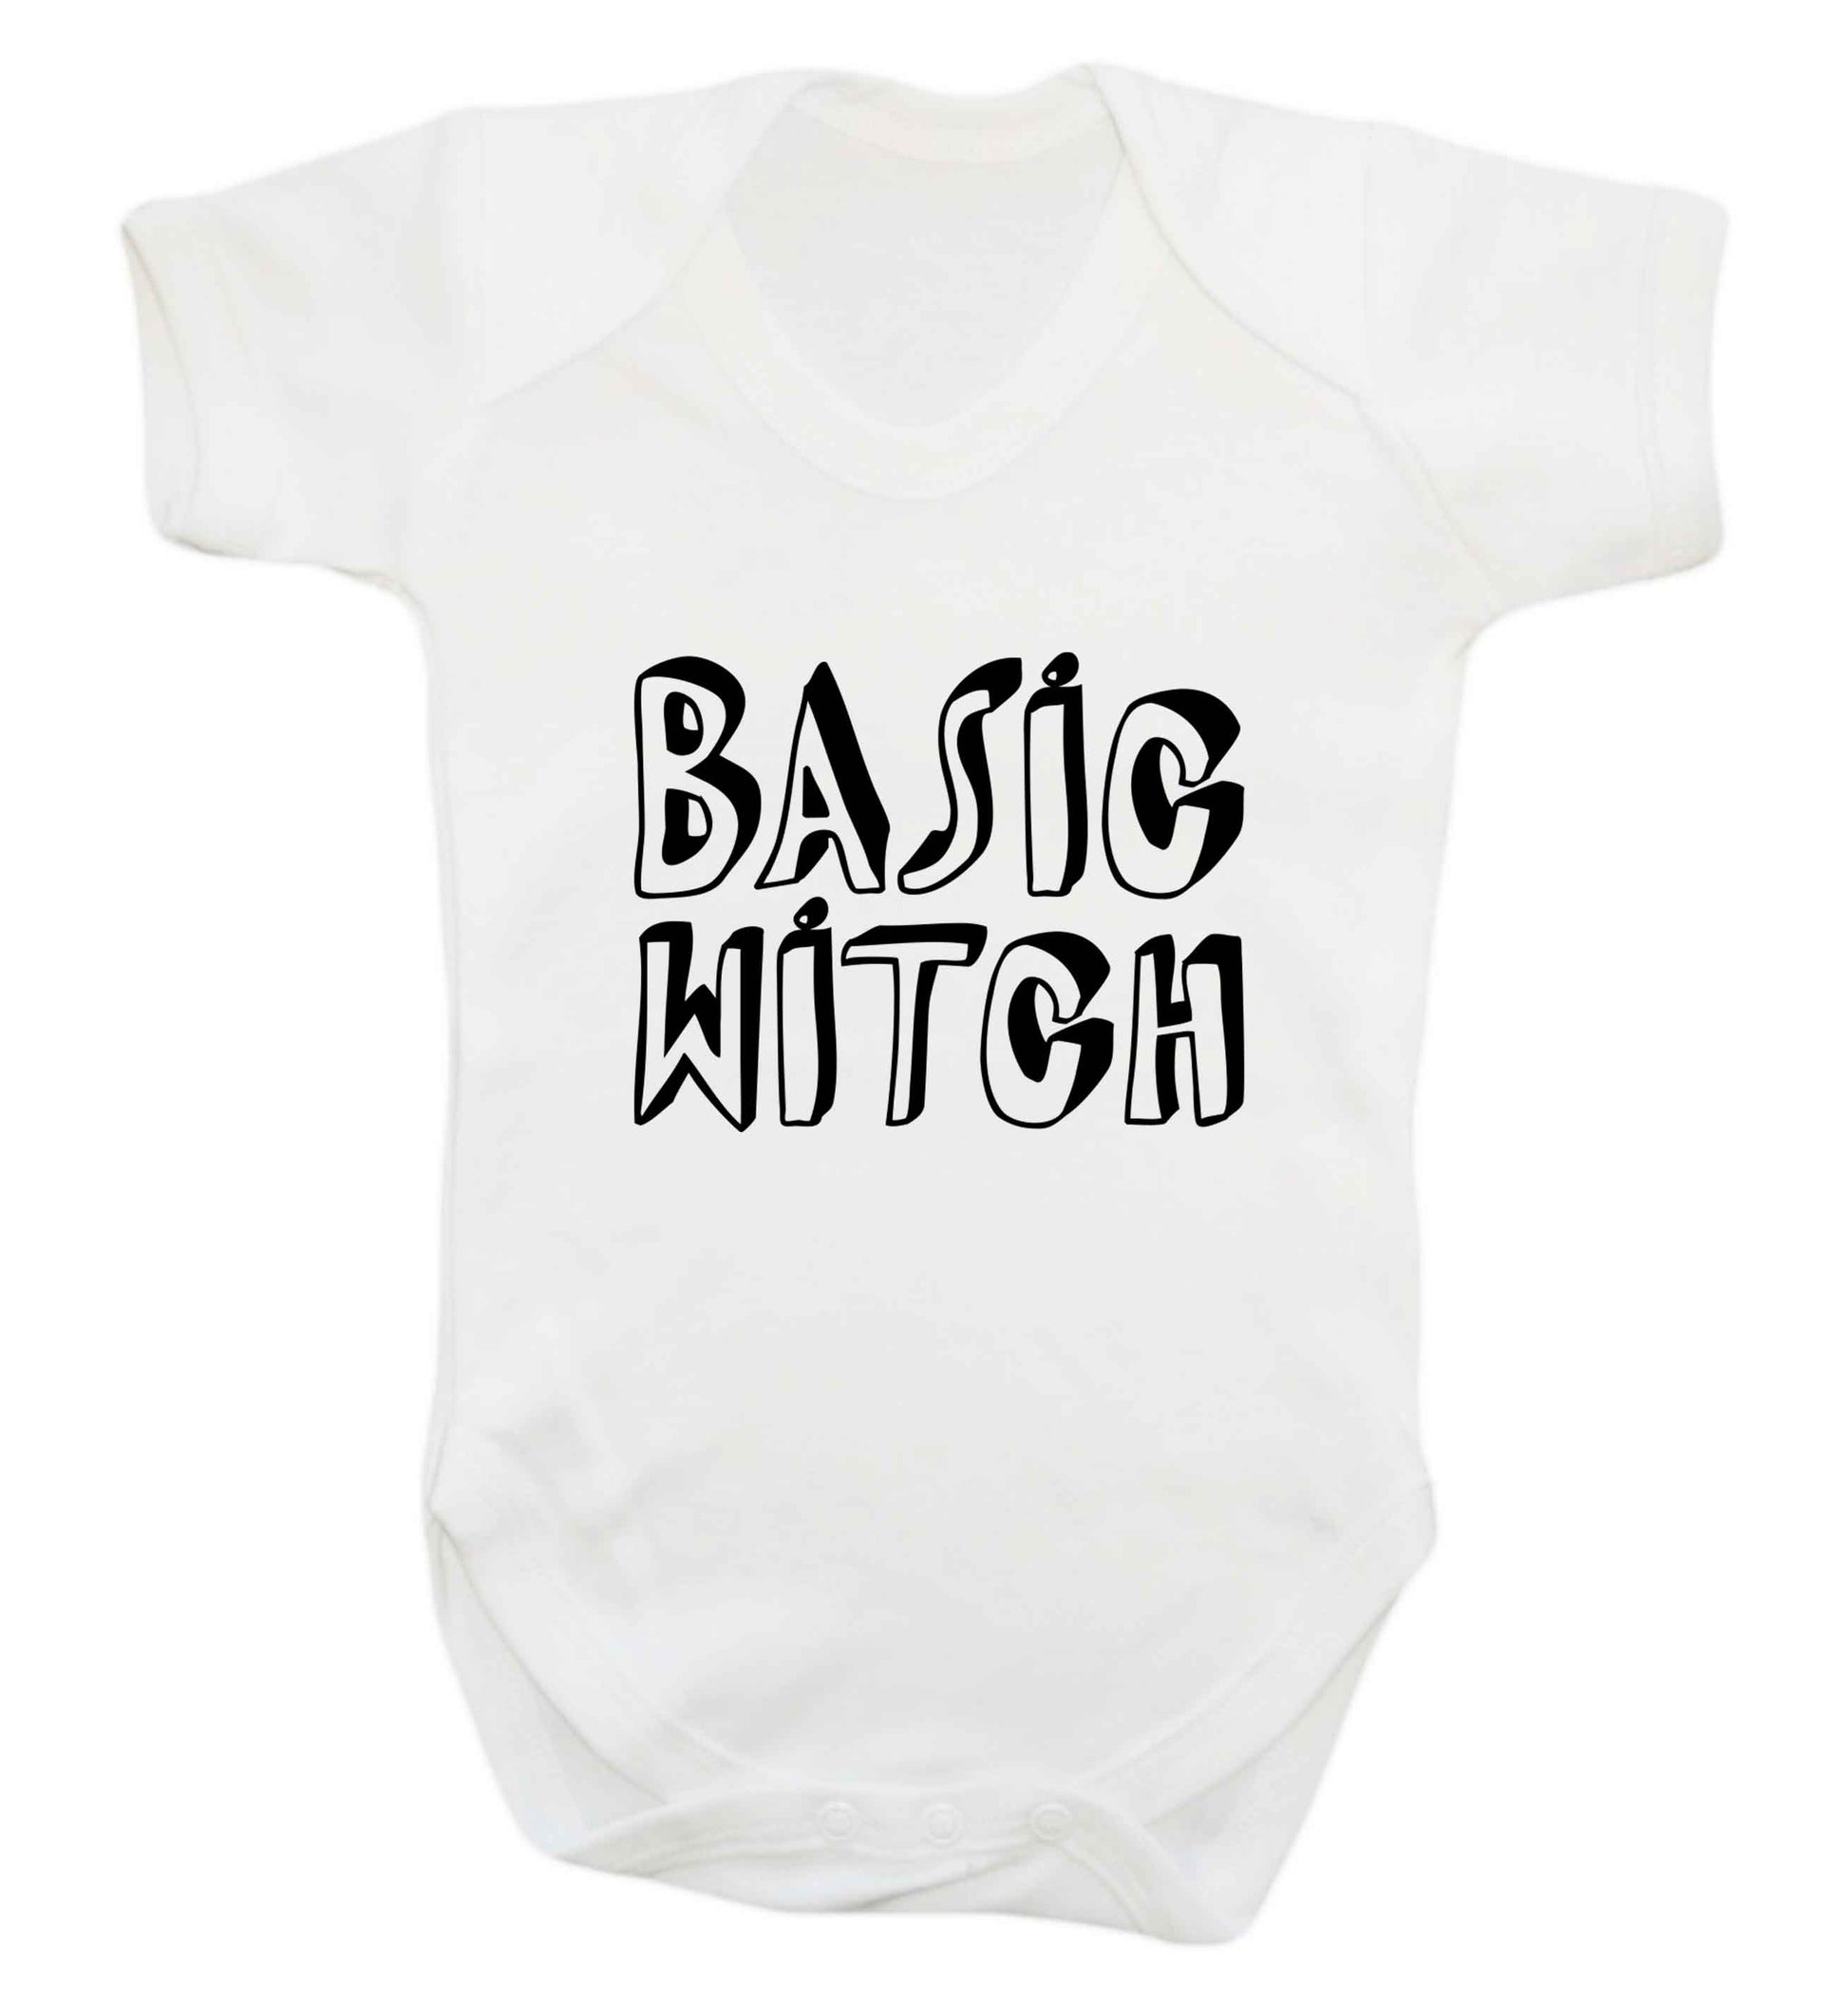 Basic witch baby vest white 18-24 months